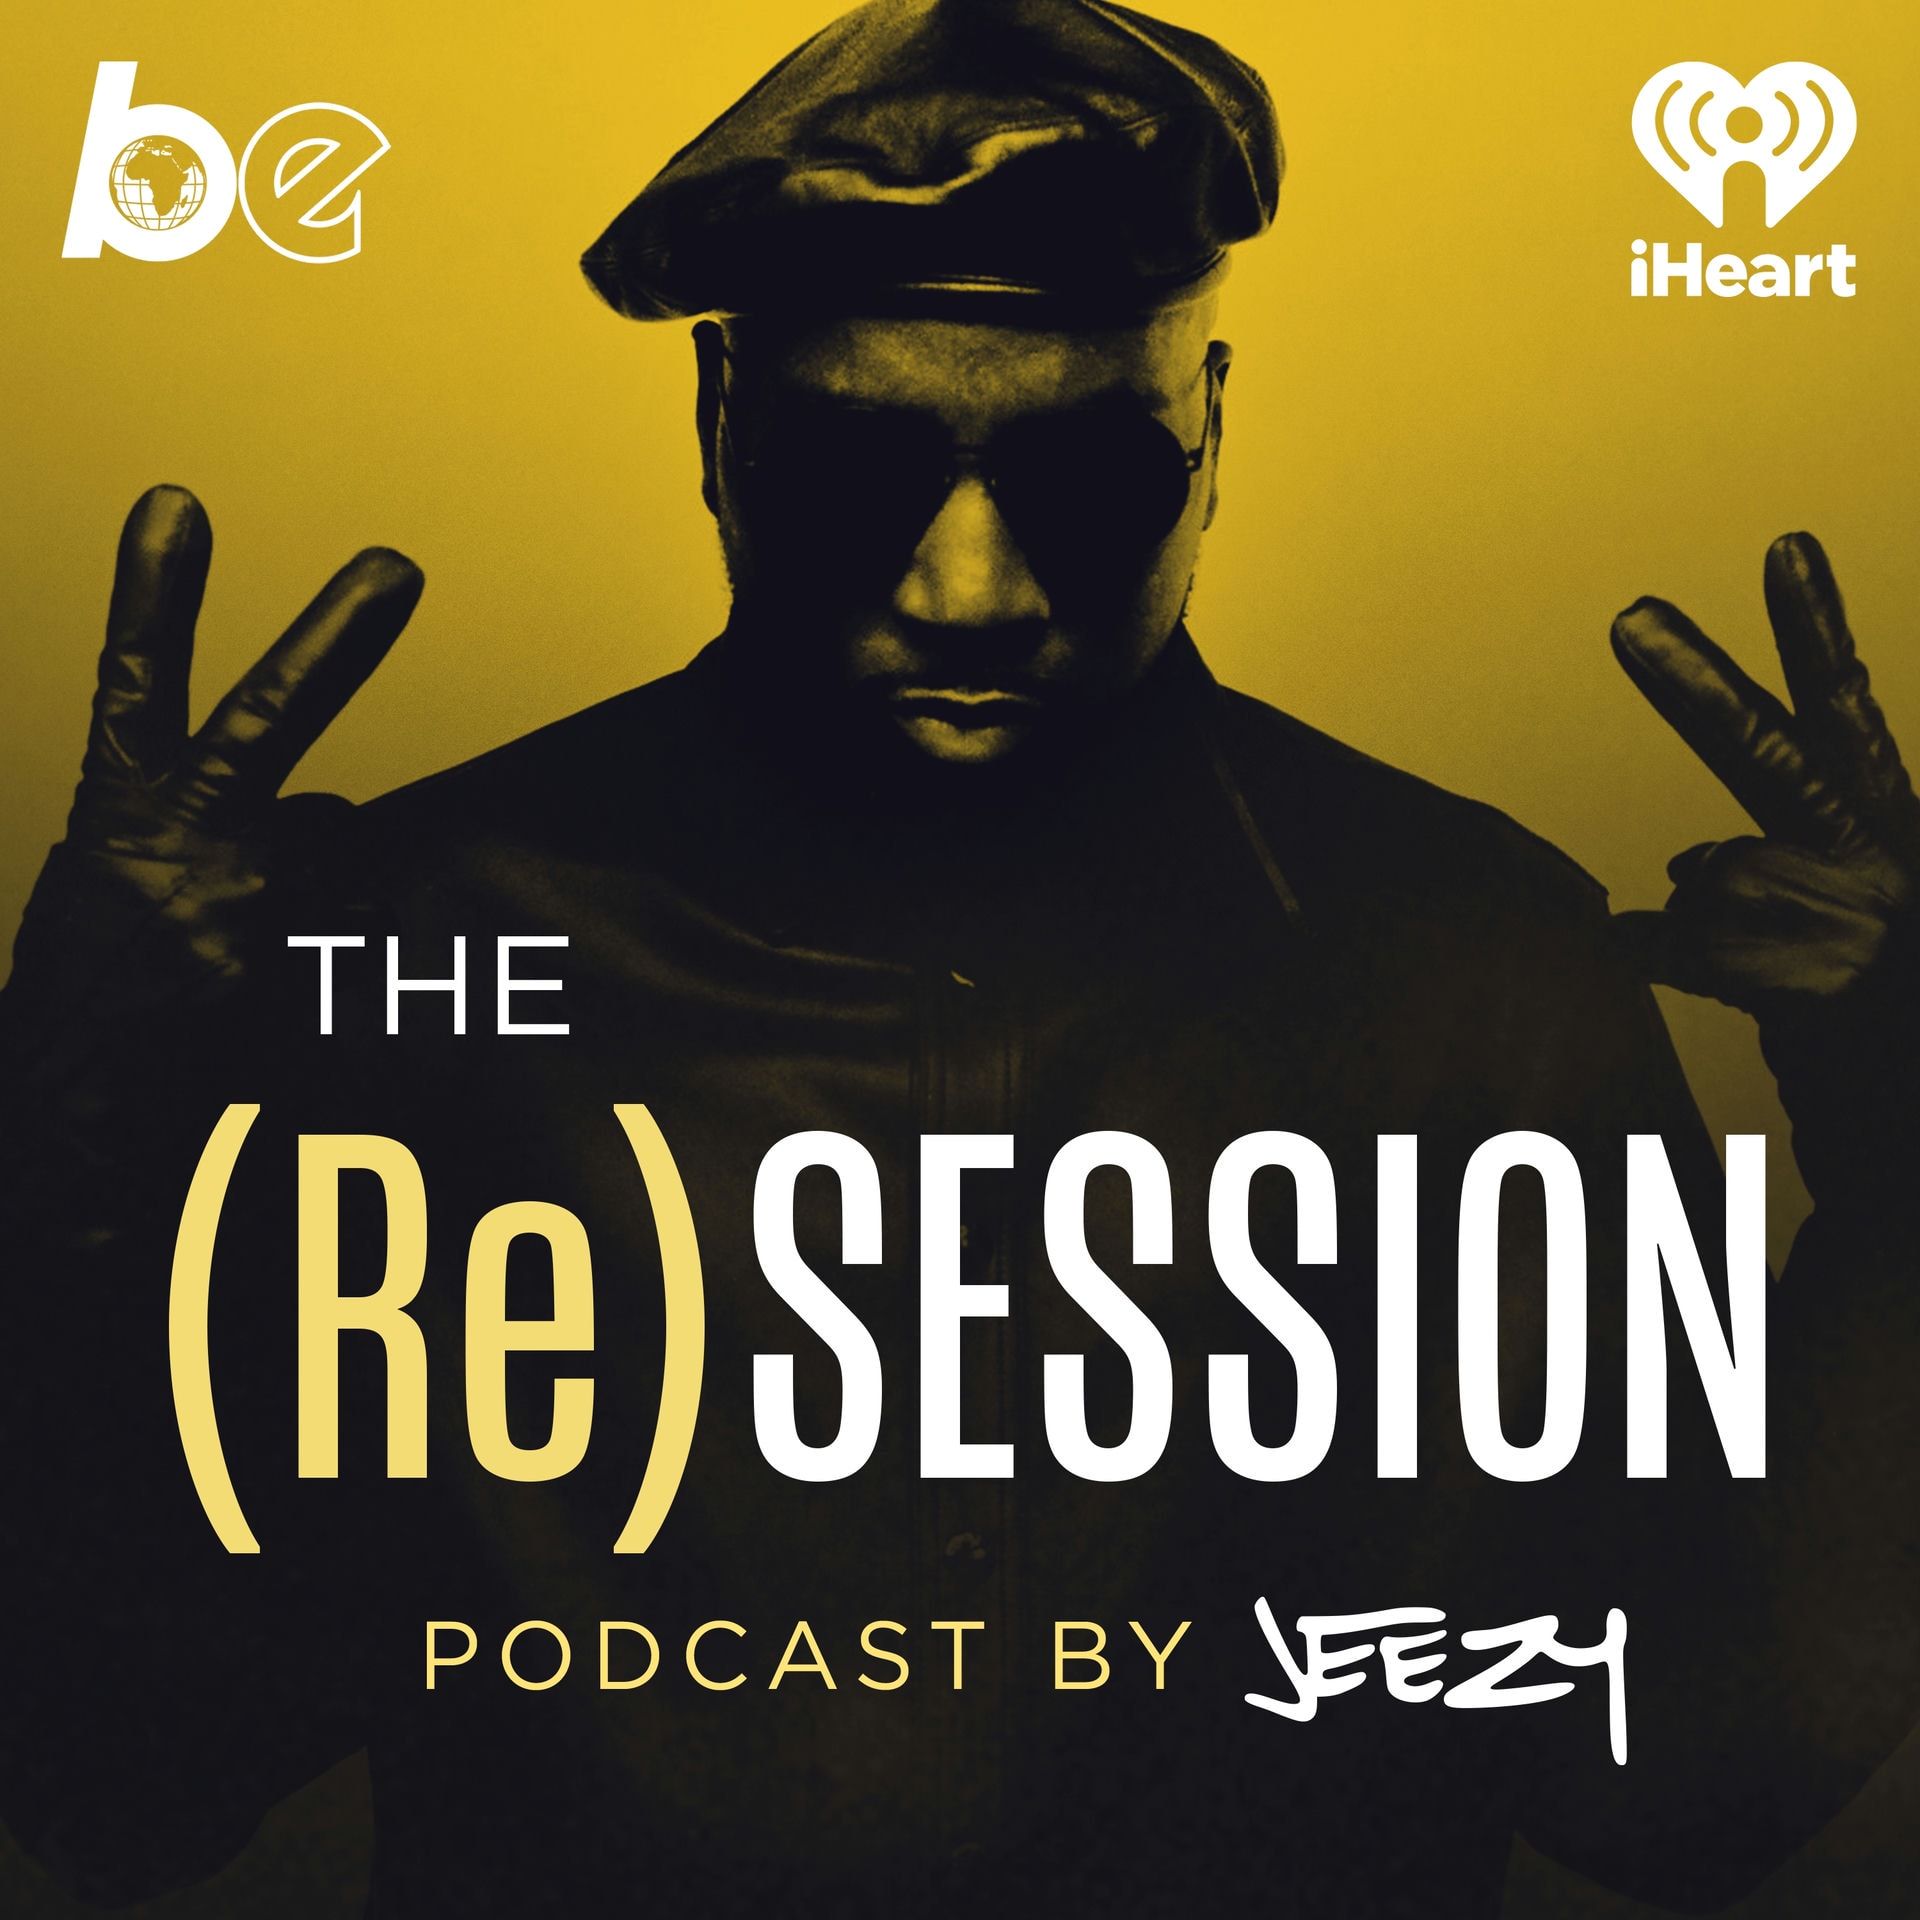 The ReSession by Jeezy